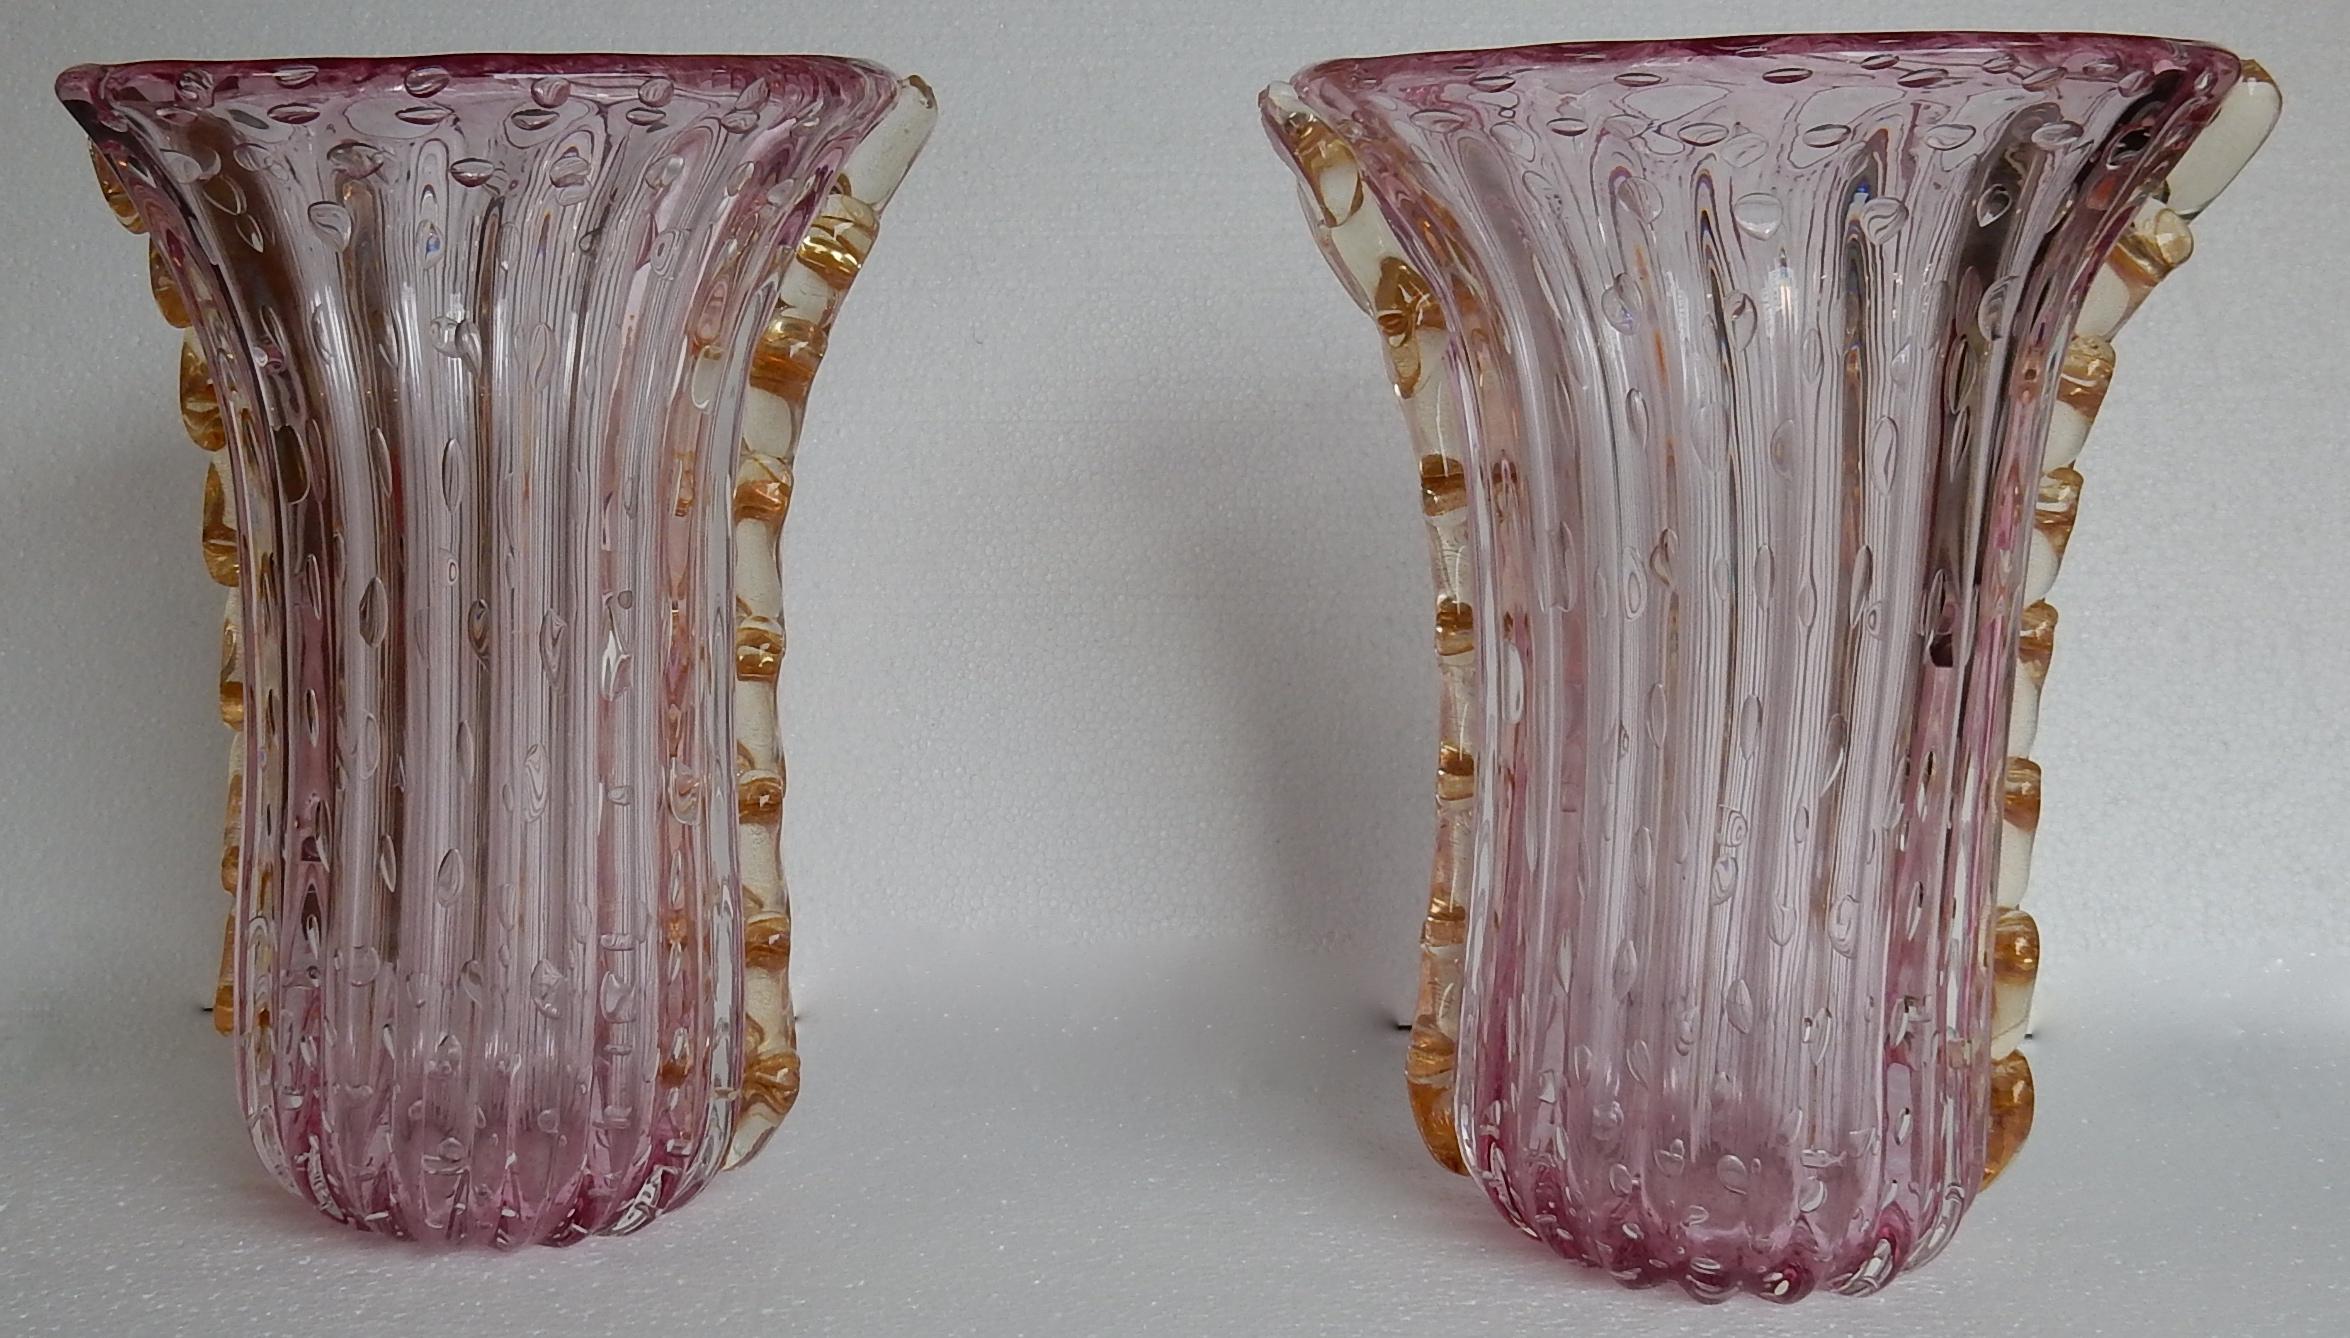 Pair of Murano vases or similar with bubbles and gold inclusions, good condition, pink crystal and gold, signed Toso.
circa 1970
They have a small difference in size

Length 26 cm
Width 28 cm
Height 34 cm
Length 24 cm
Width 27 cm
Height 34